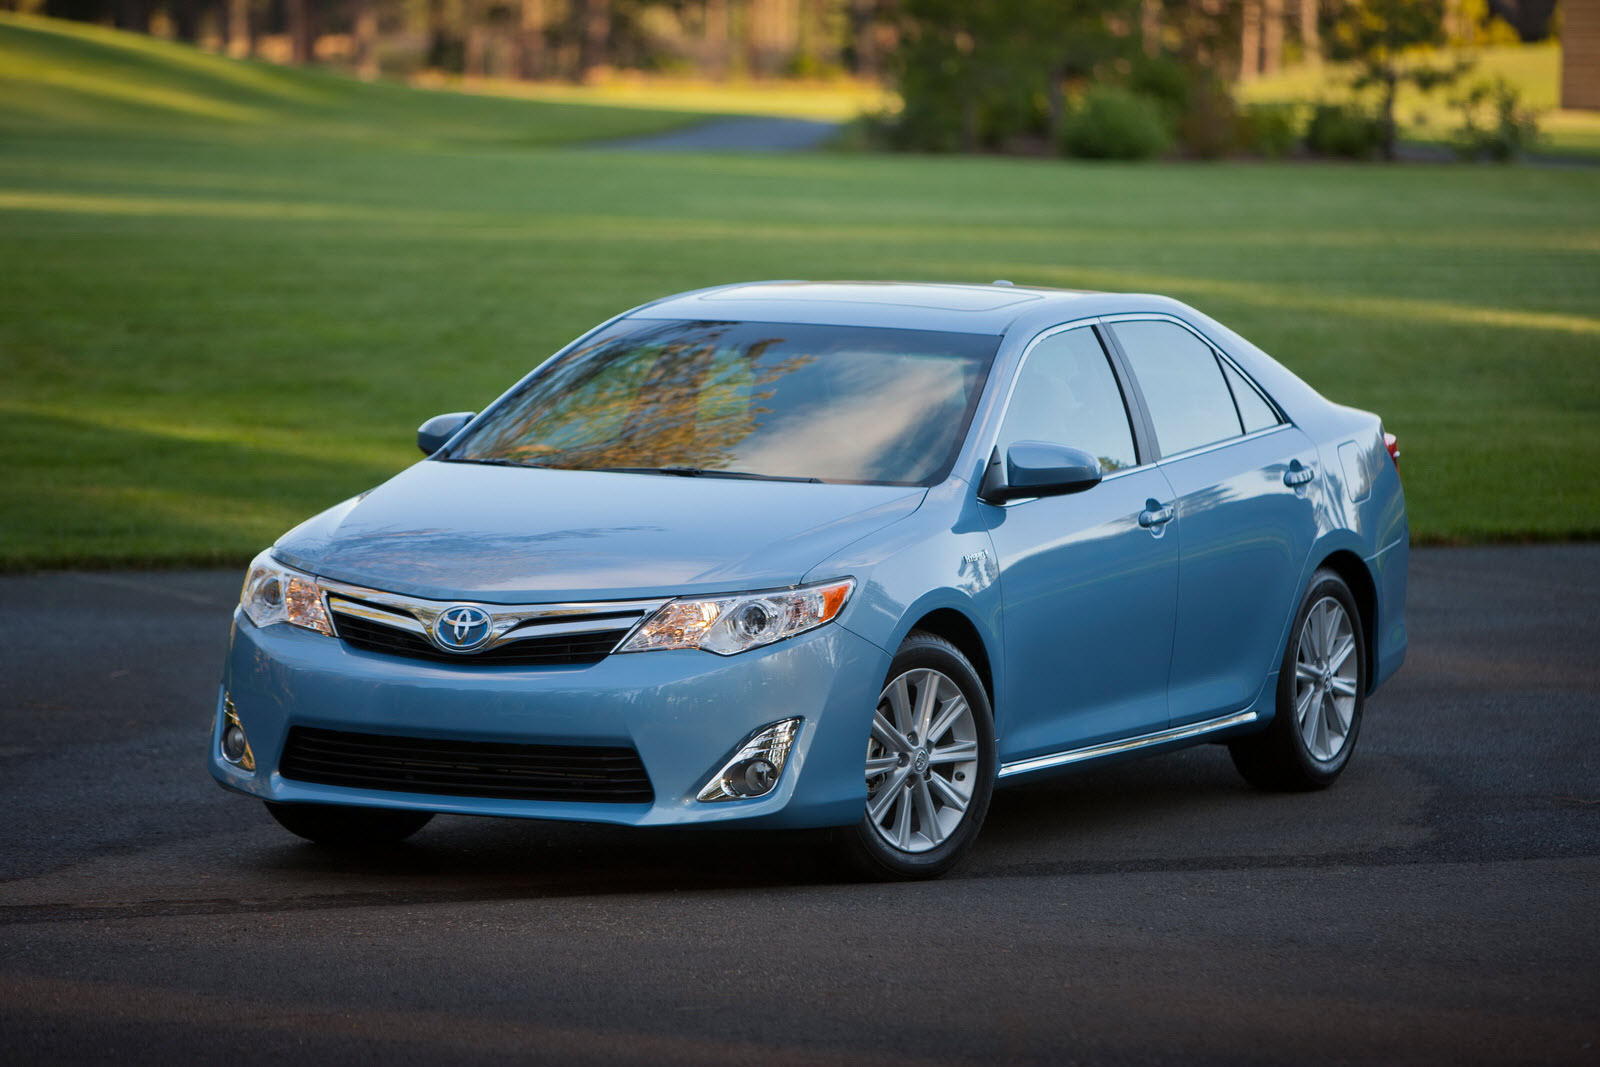 Toyota introduces Seventh-Generation Camry for 2012